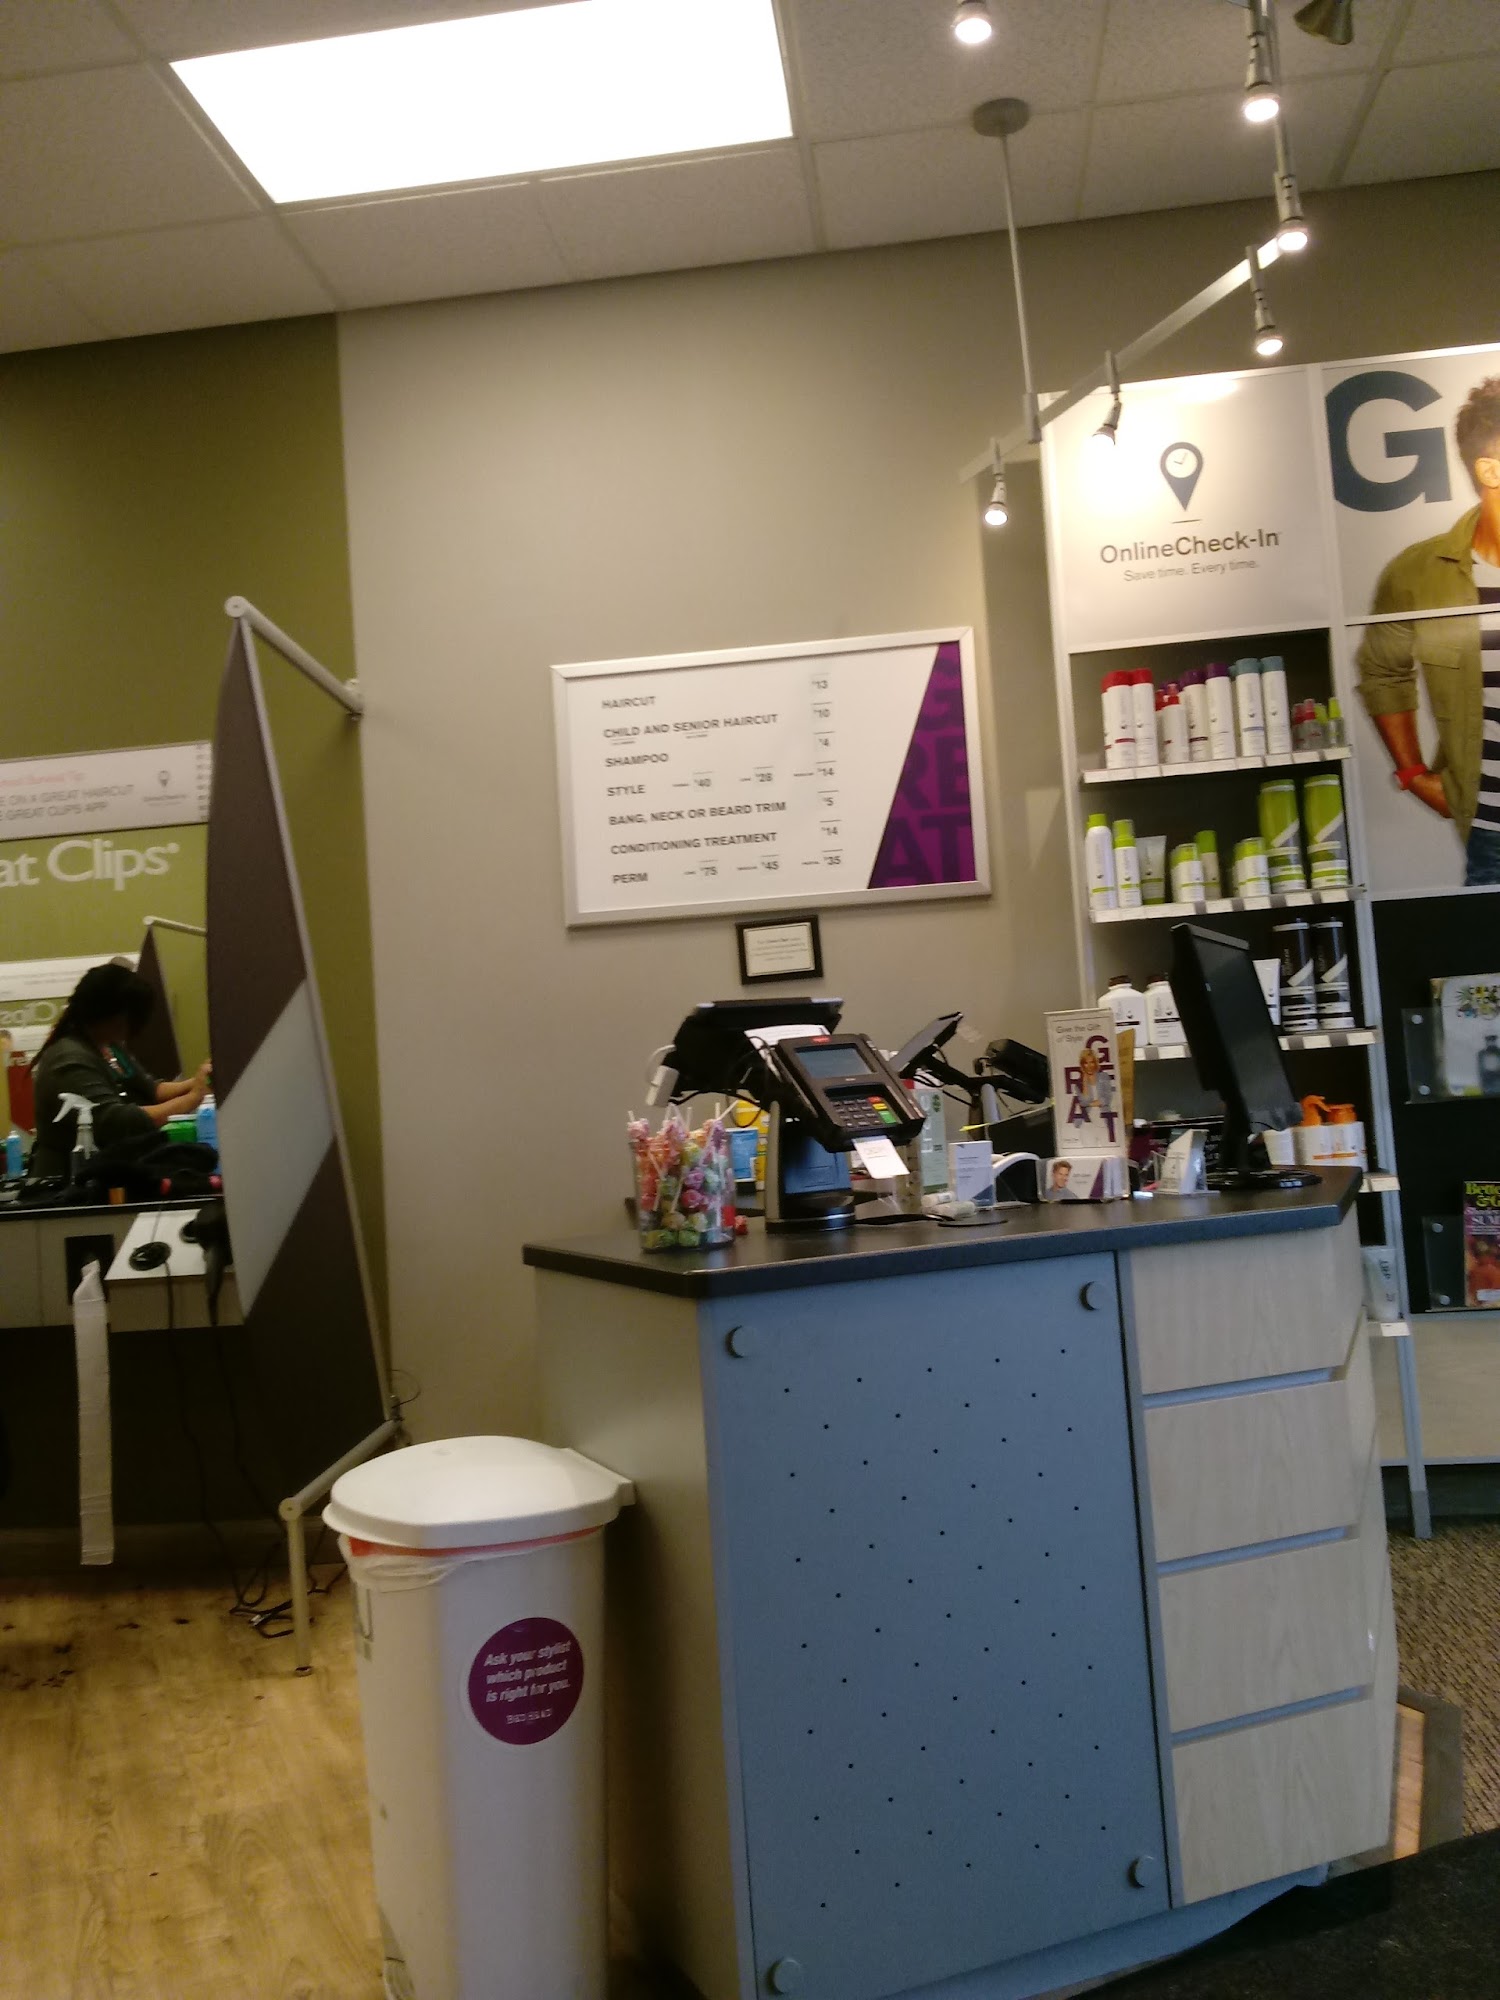 Great Clips 124 Pricedale Rd, Rostraver Pennsylvania 15012